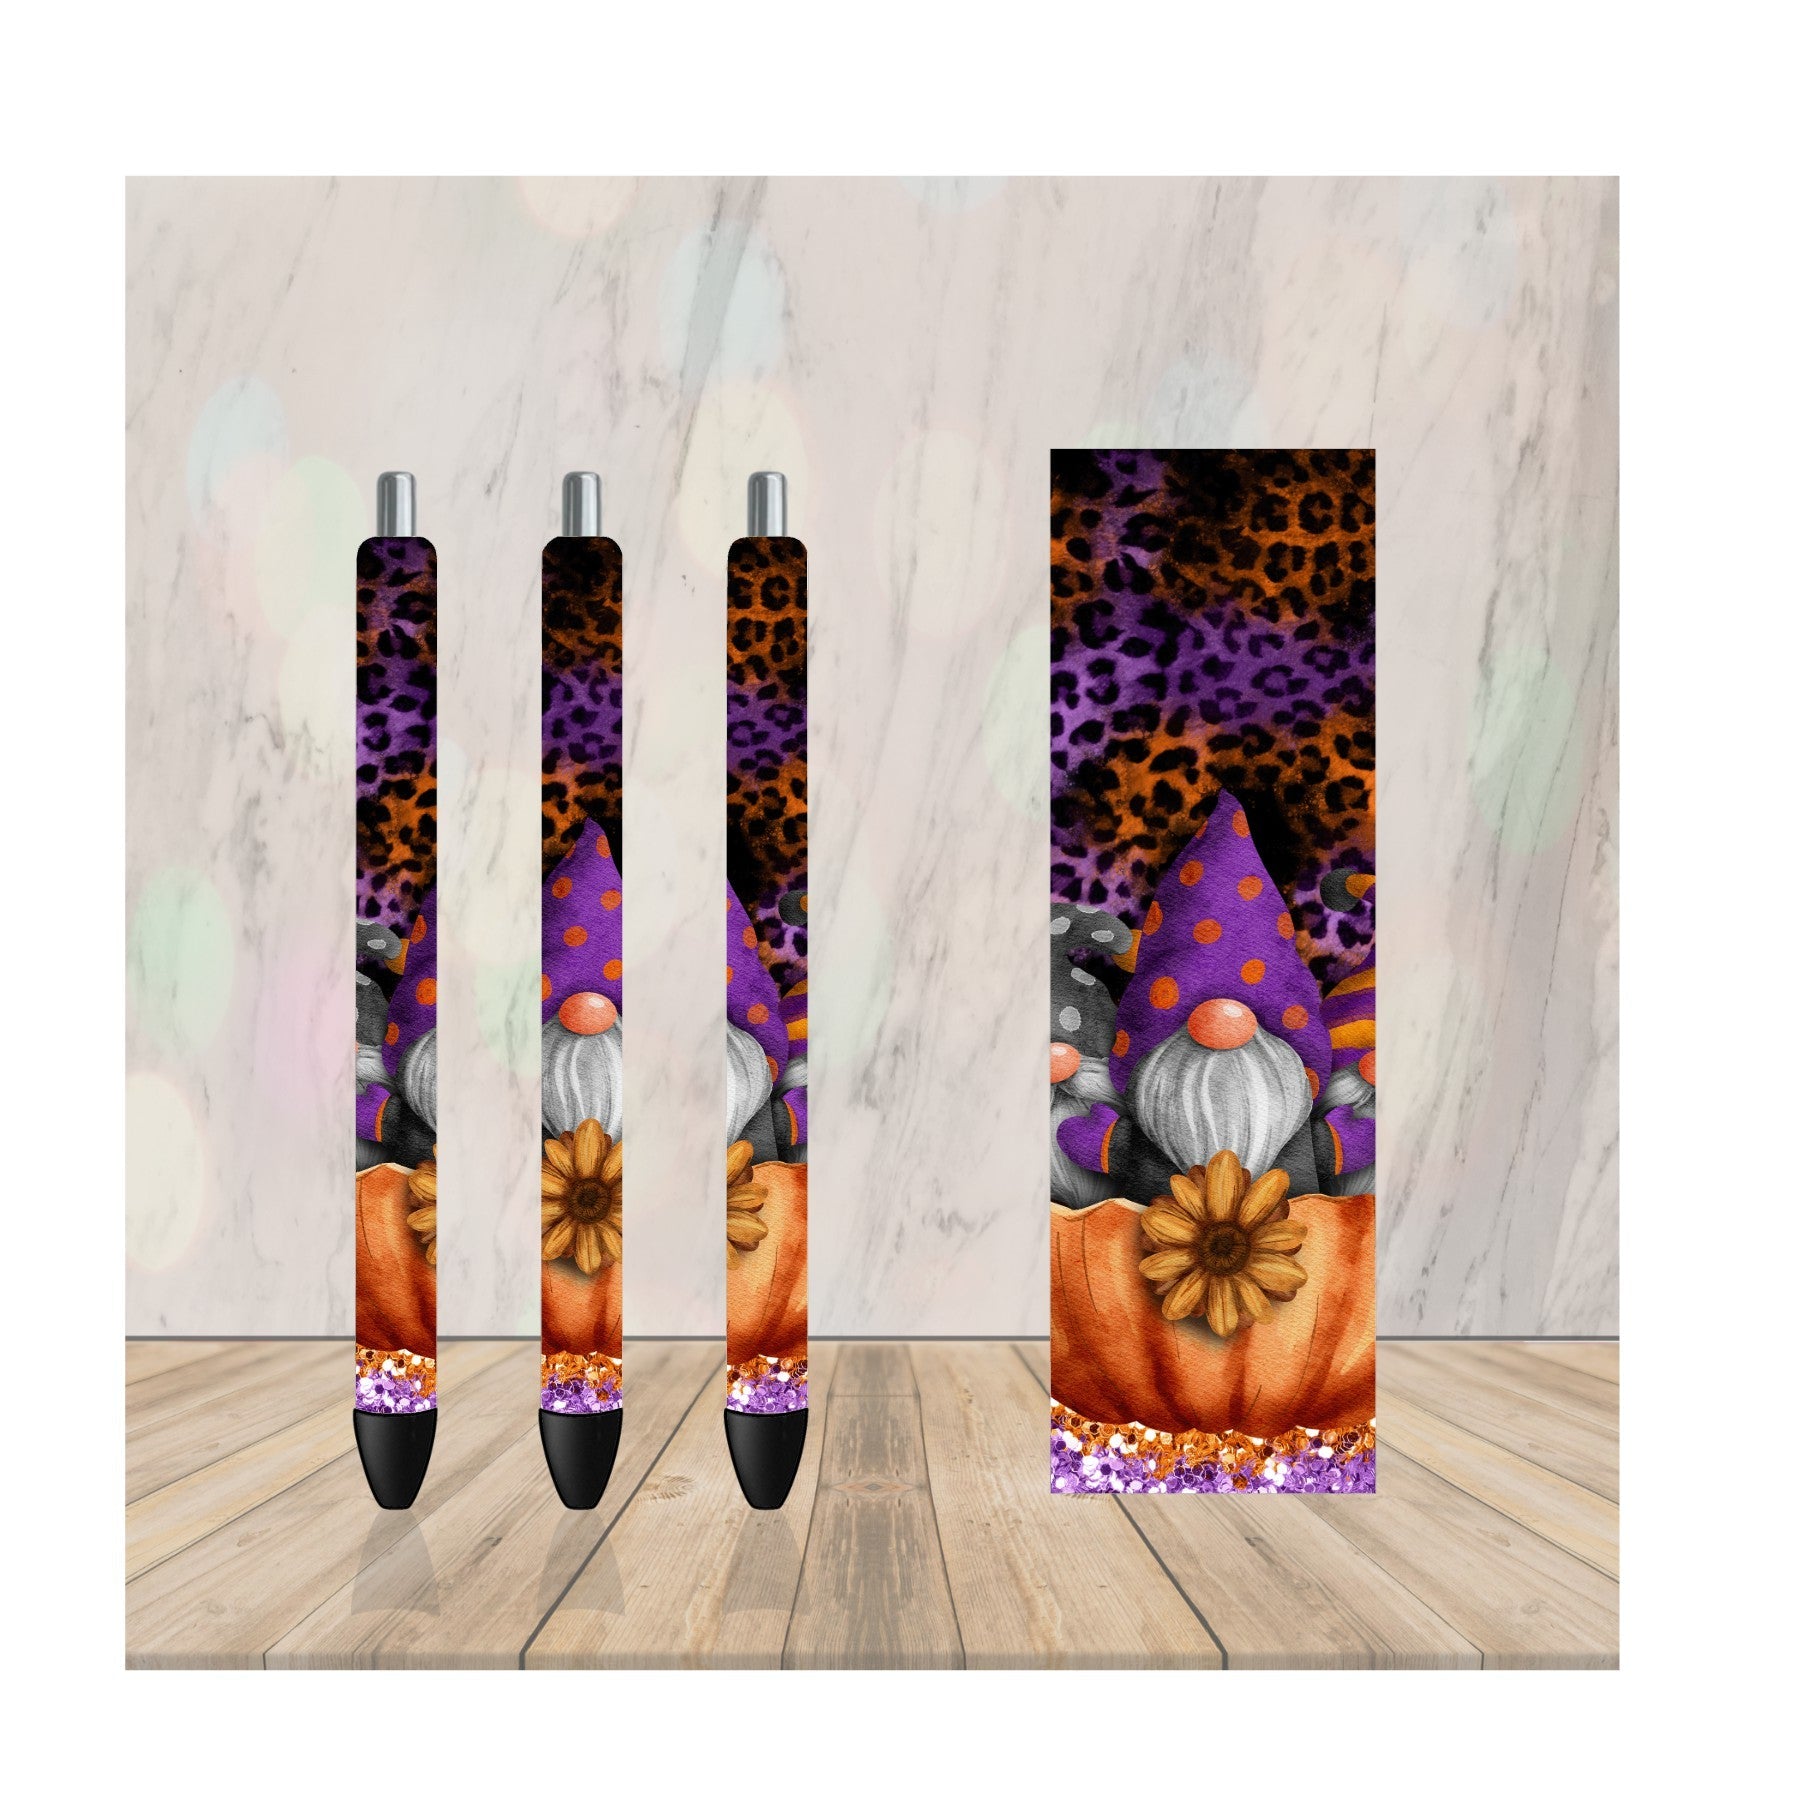 https://cdn.shopify.com/s/files/1/1623/6609/products/halloweenwatercolorgnome.jpg?v=1662046629